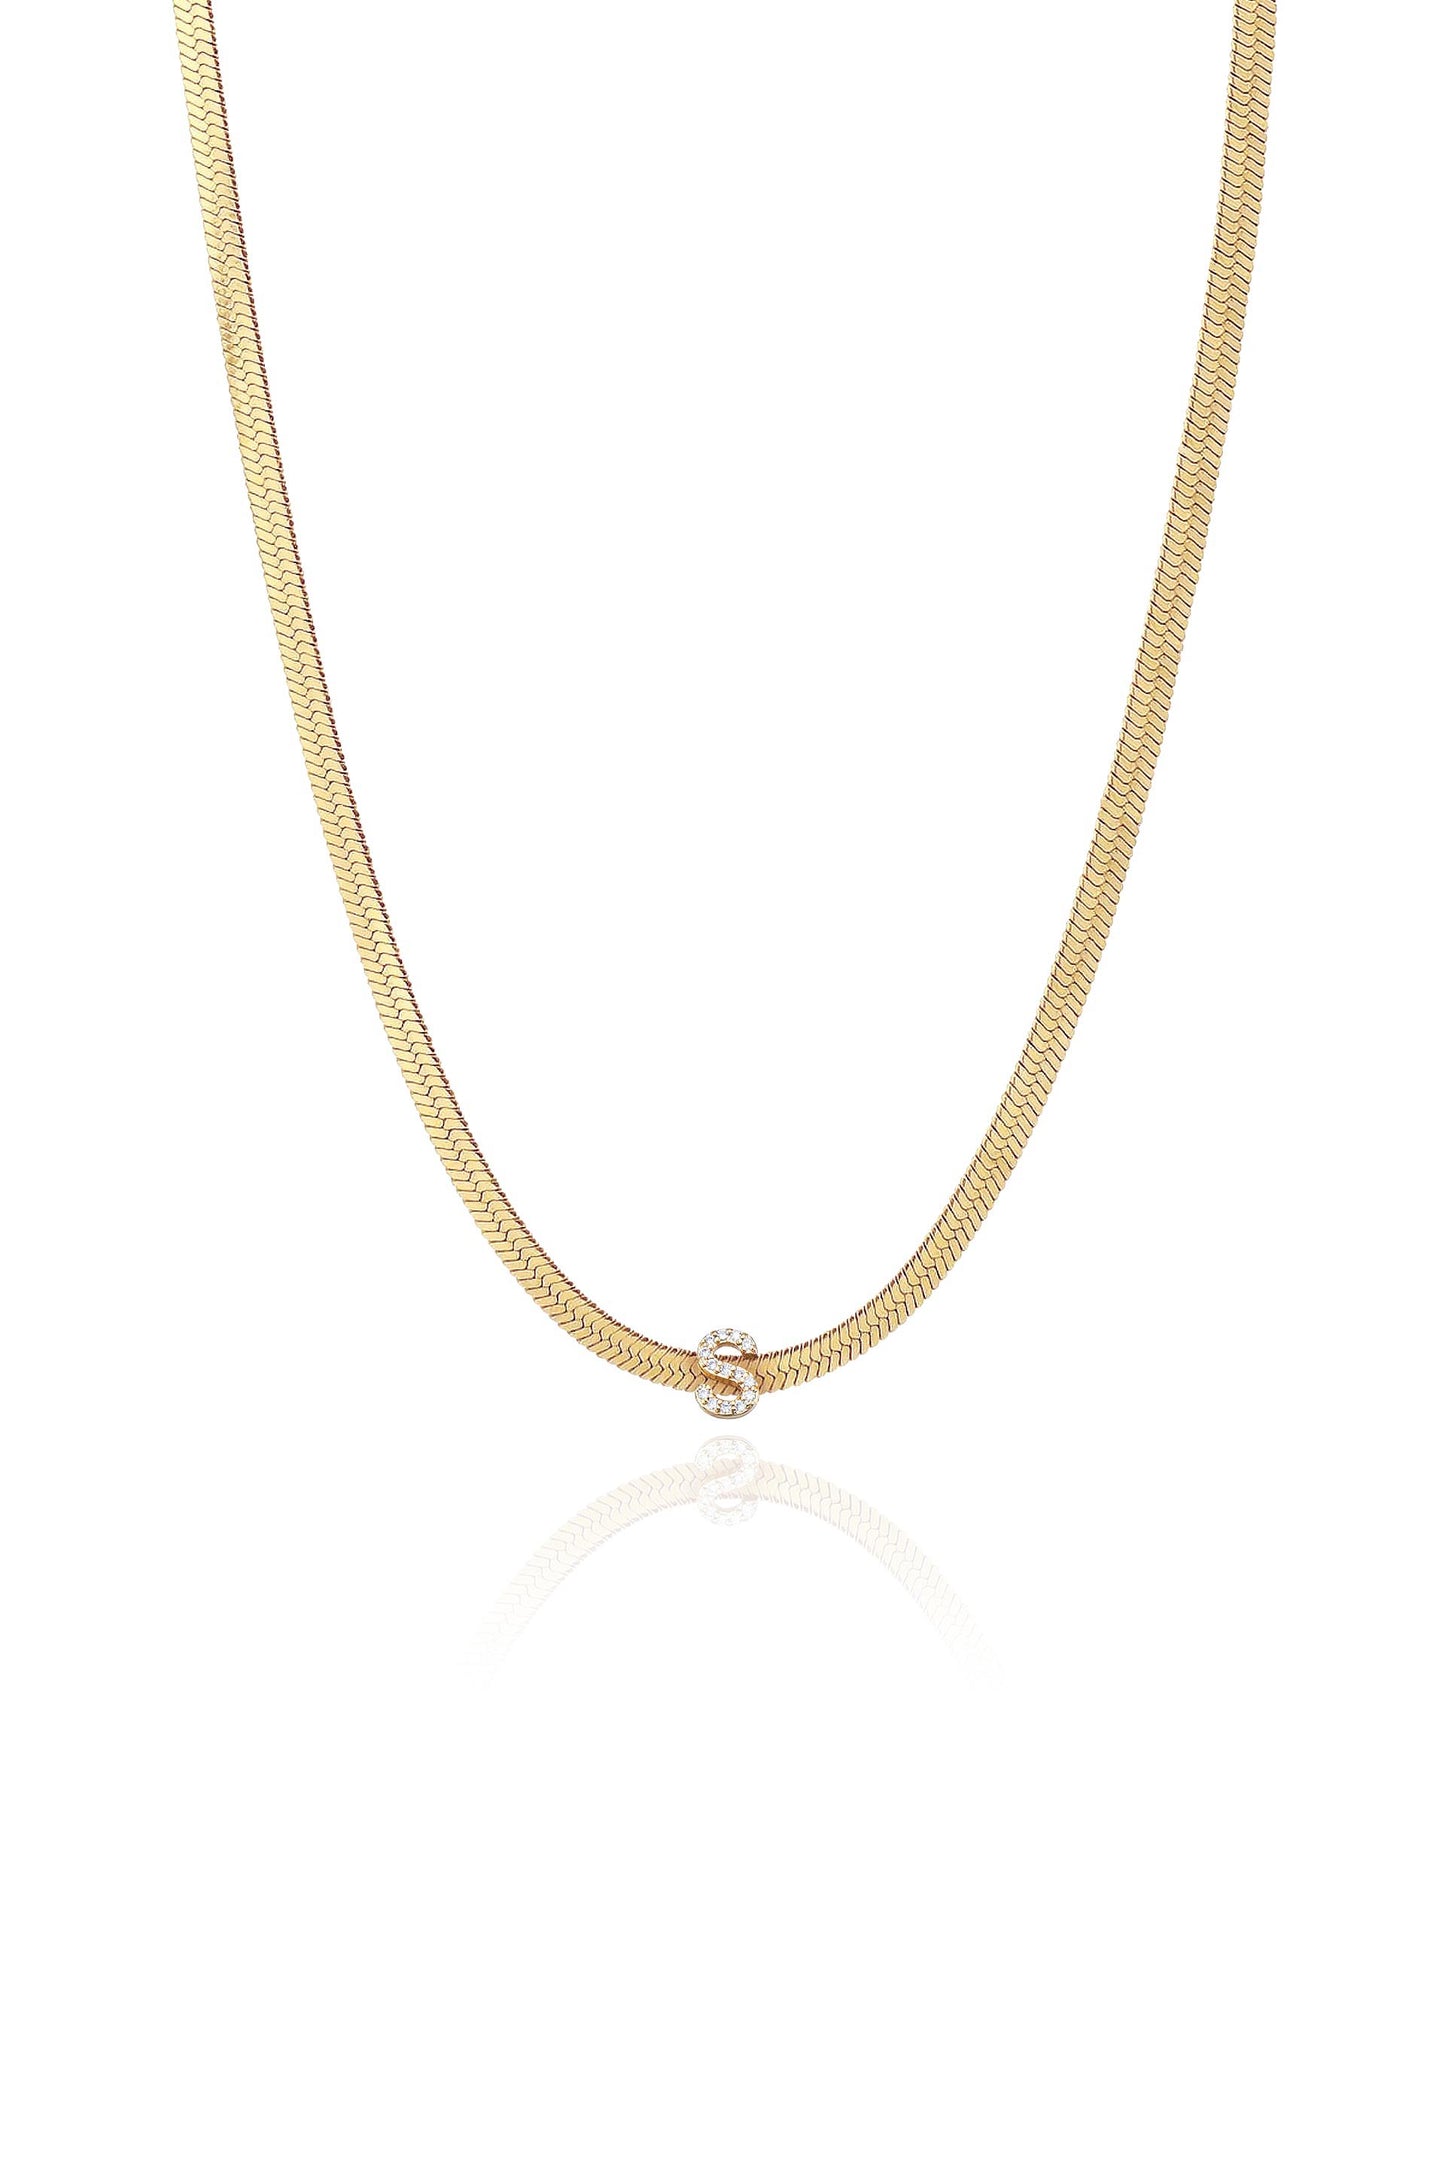 Initial Herringbone 18k Gold Plated Necklace - S